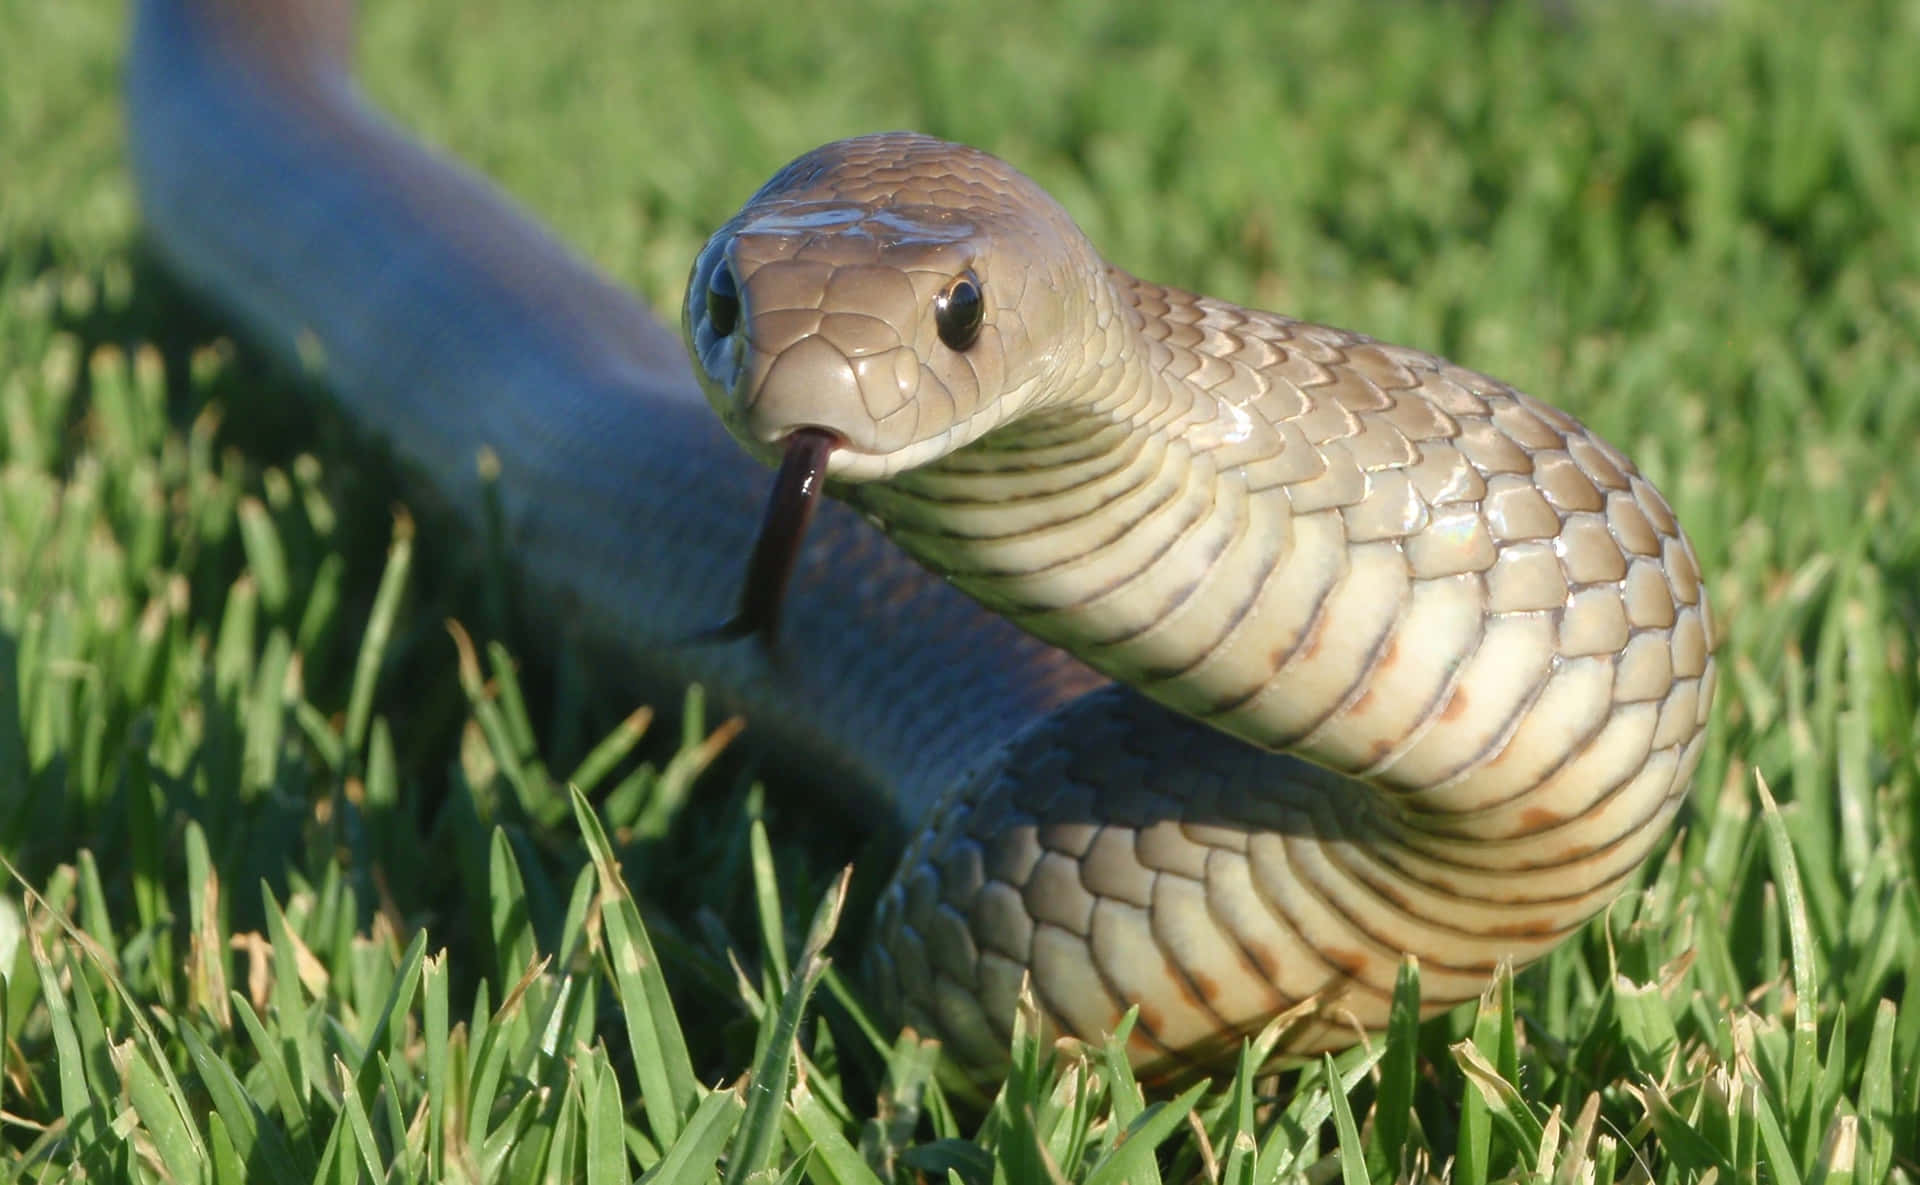 Caption: Close-up of a magnificent Brown Snake in its natural habitat Wallpaper